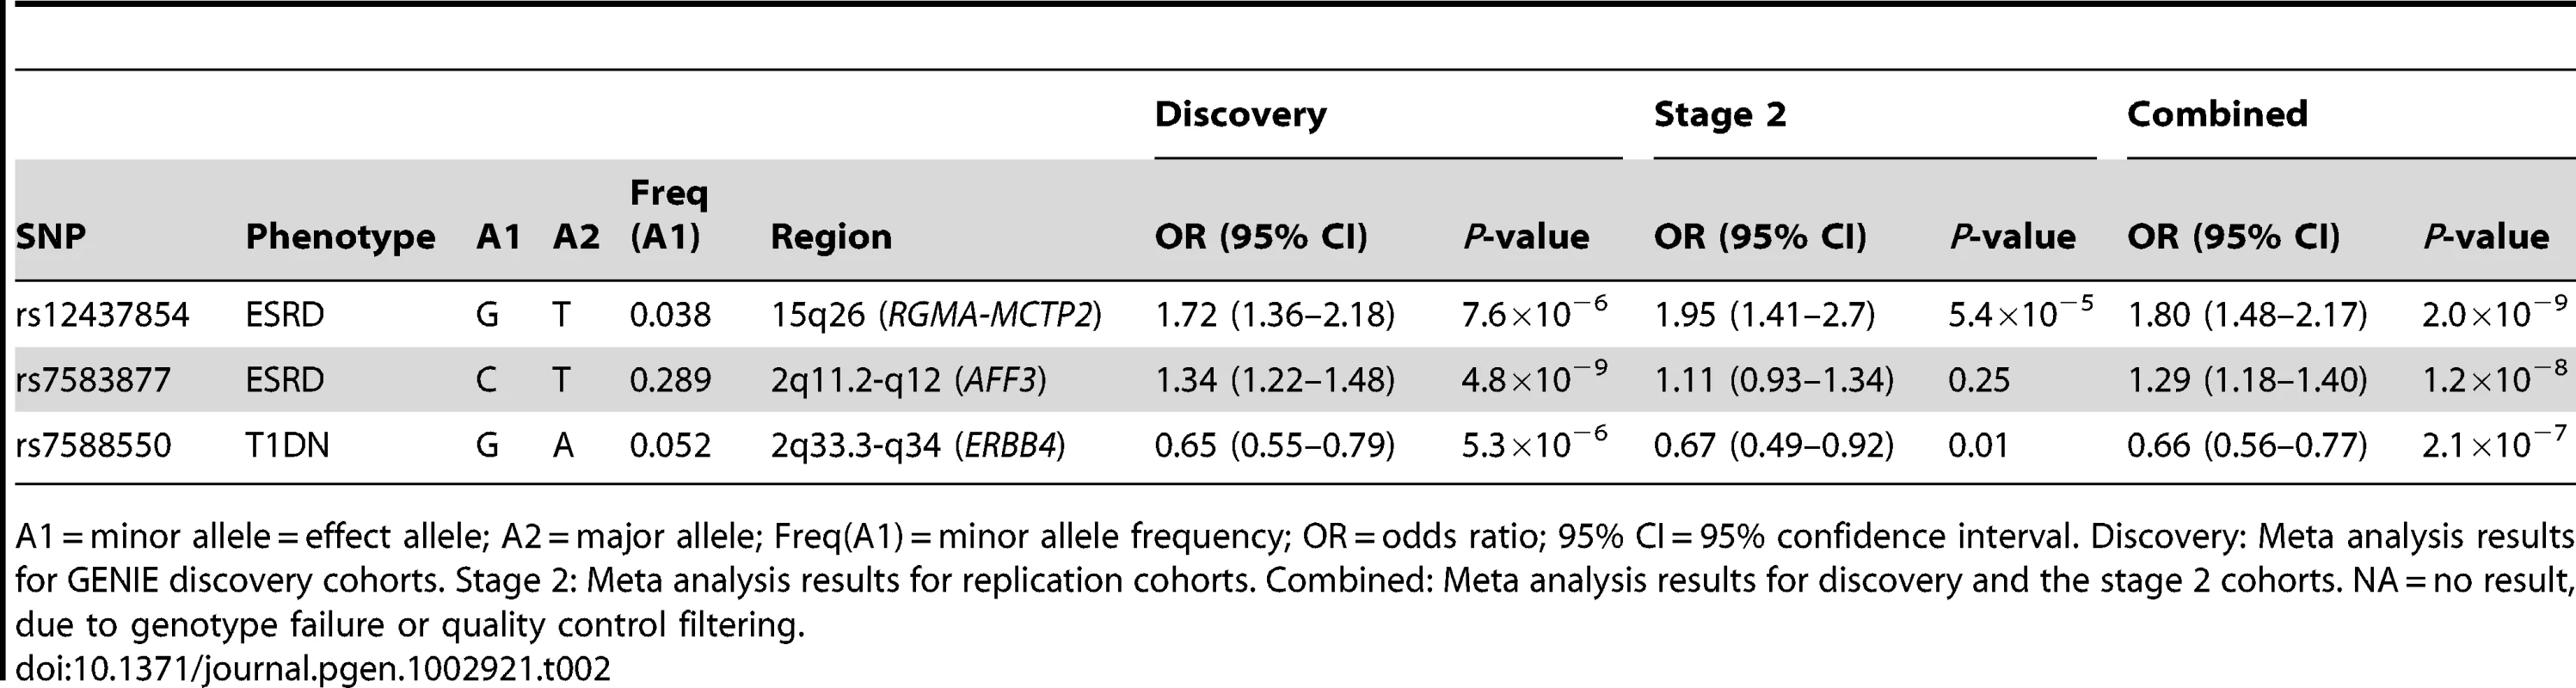 Results from discovery, second stage, and combined meta-analysis for supported markers.